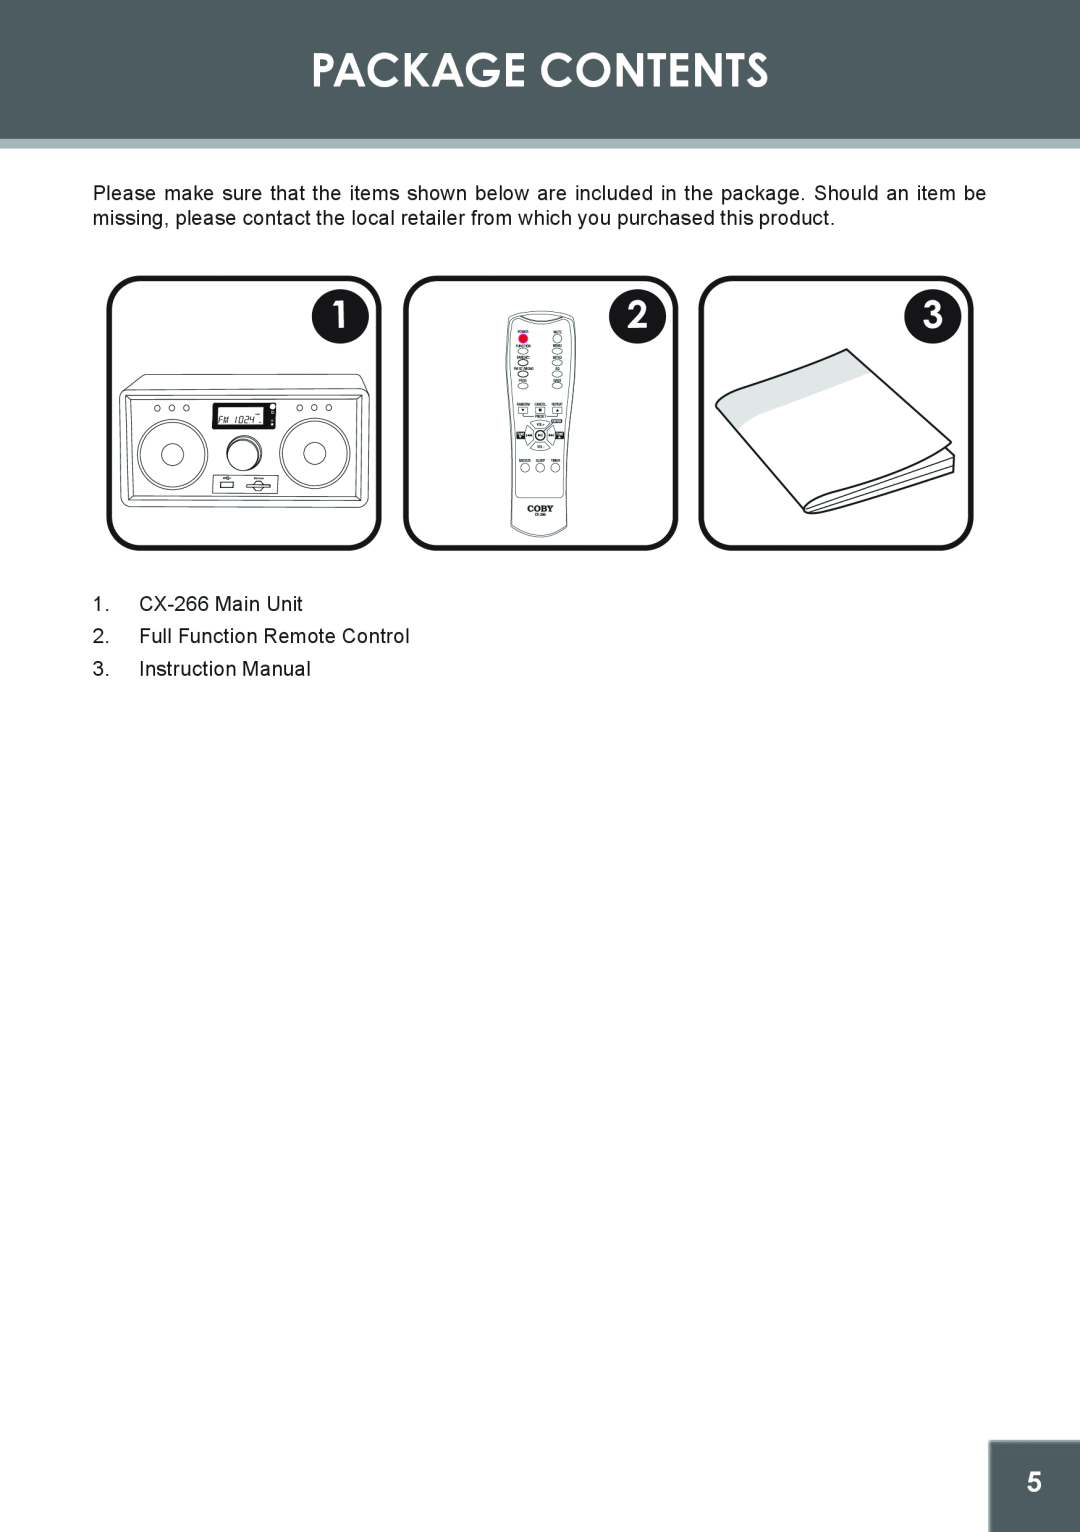 COBY electronic instruction manual Package Contents, 1.CX-266Main Unit 2.Full Function Remote Control 